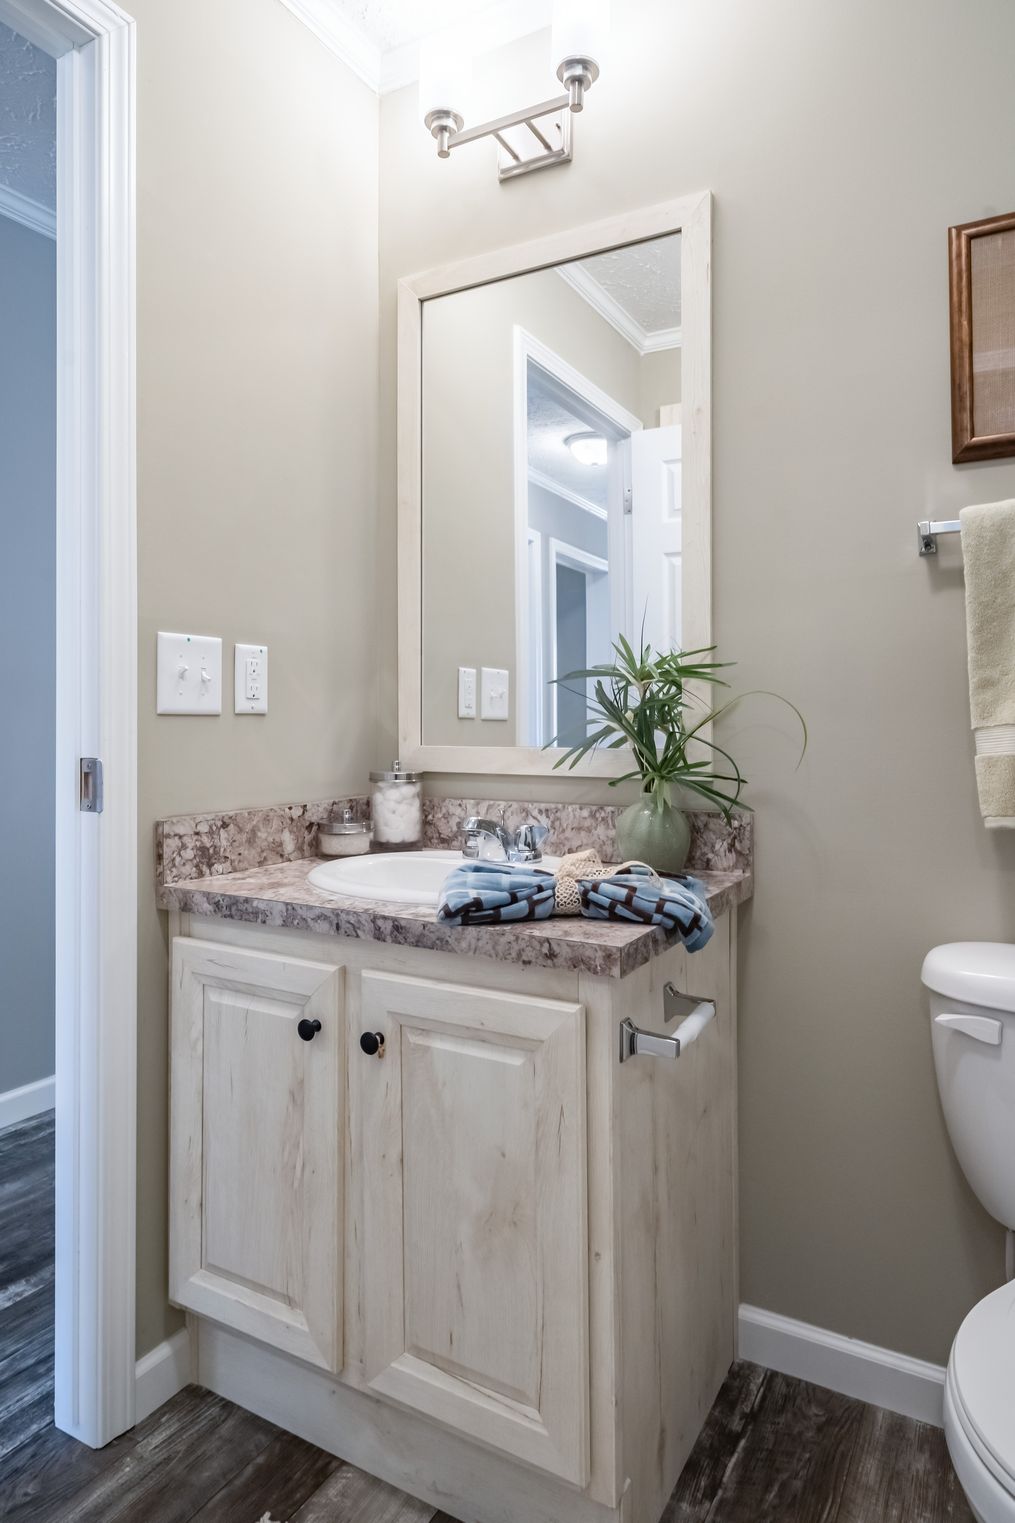 The 4608 ROCKETEER 5628 Guest Bathroom. This Manufactured Mobile Home features 3 bedrooms and 2 baths.